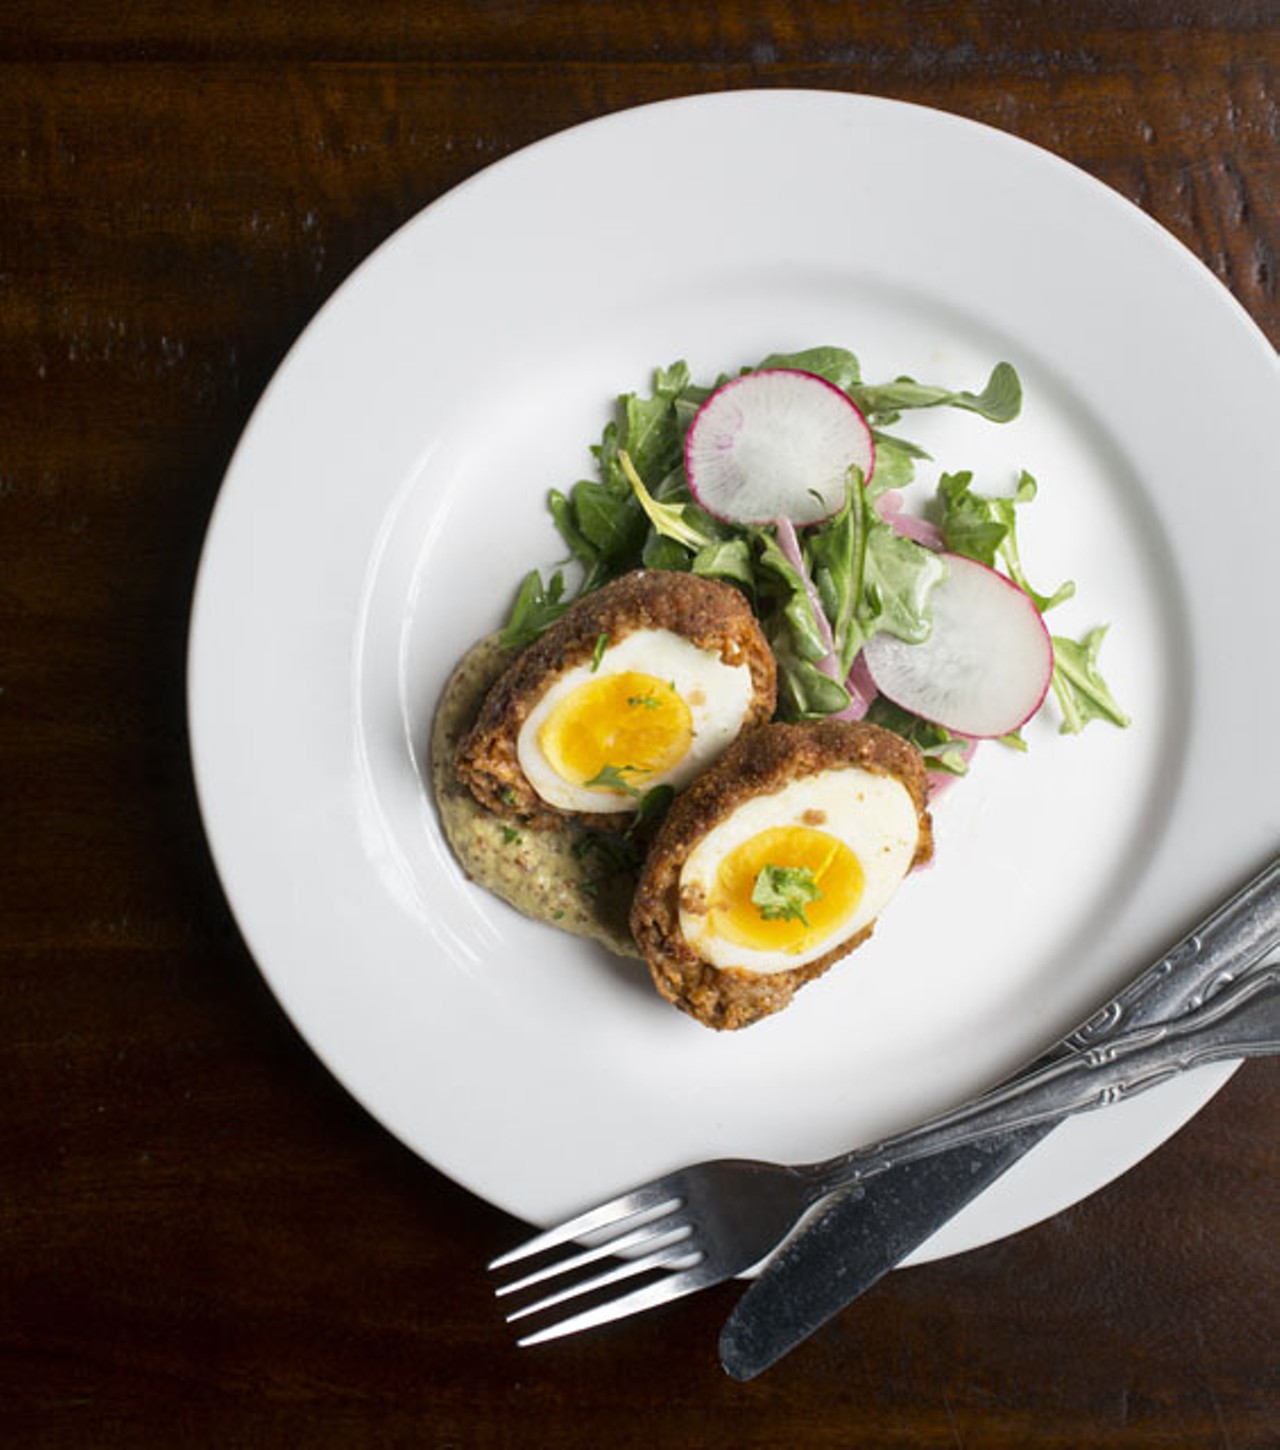 Bella Vino's Spanish Scotch egg will debut at brunch on Sunday, March 2. It's made with chorizo and grain mustard sauce.